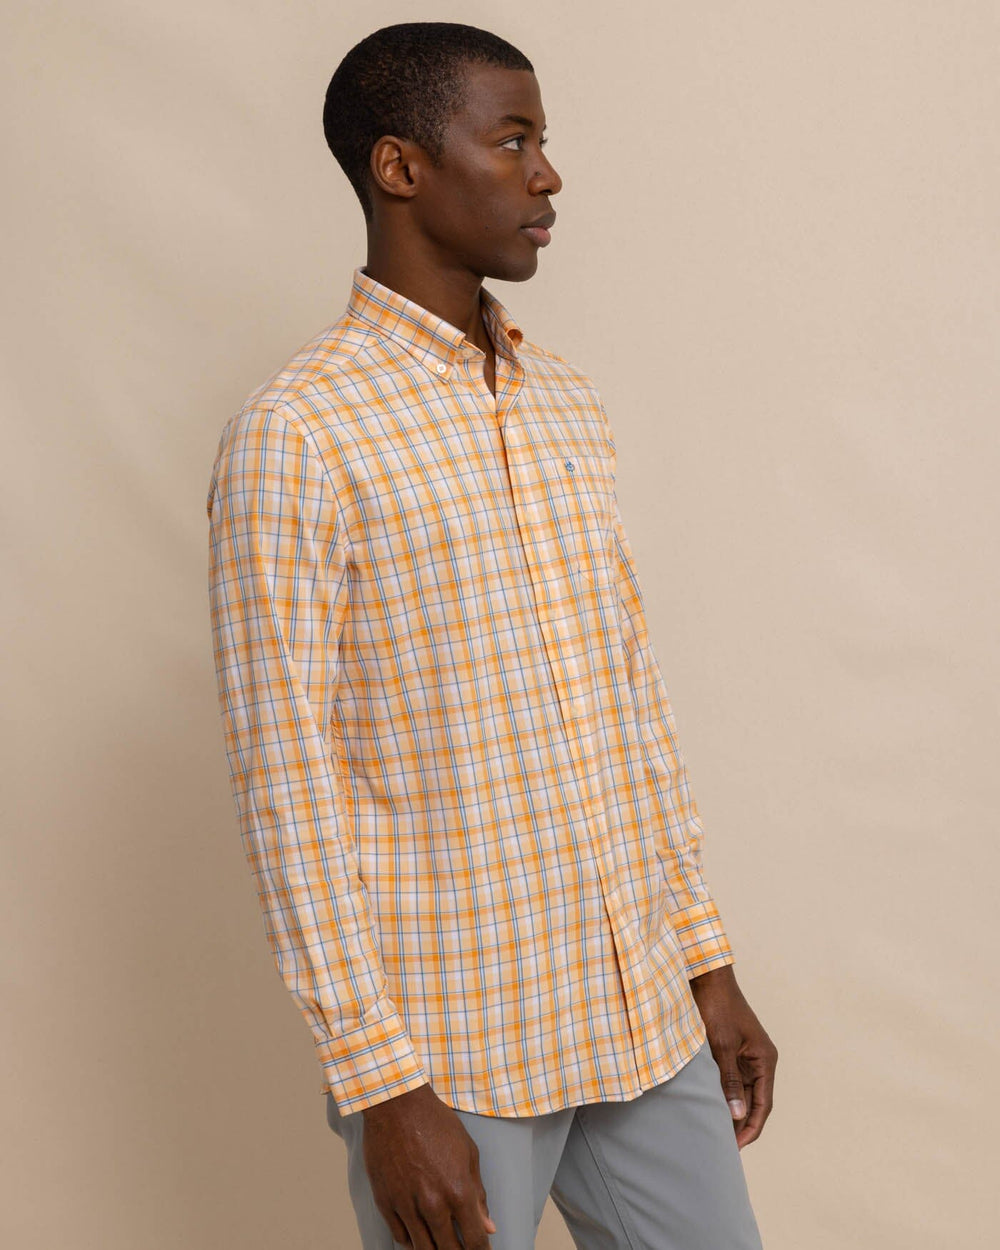 The front view of the Southern Tide brrr Whalehead Plaid Intercoastal Sport Shirt by Southern Tide - Horizon